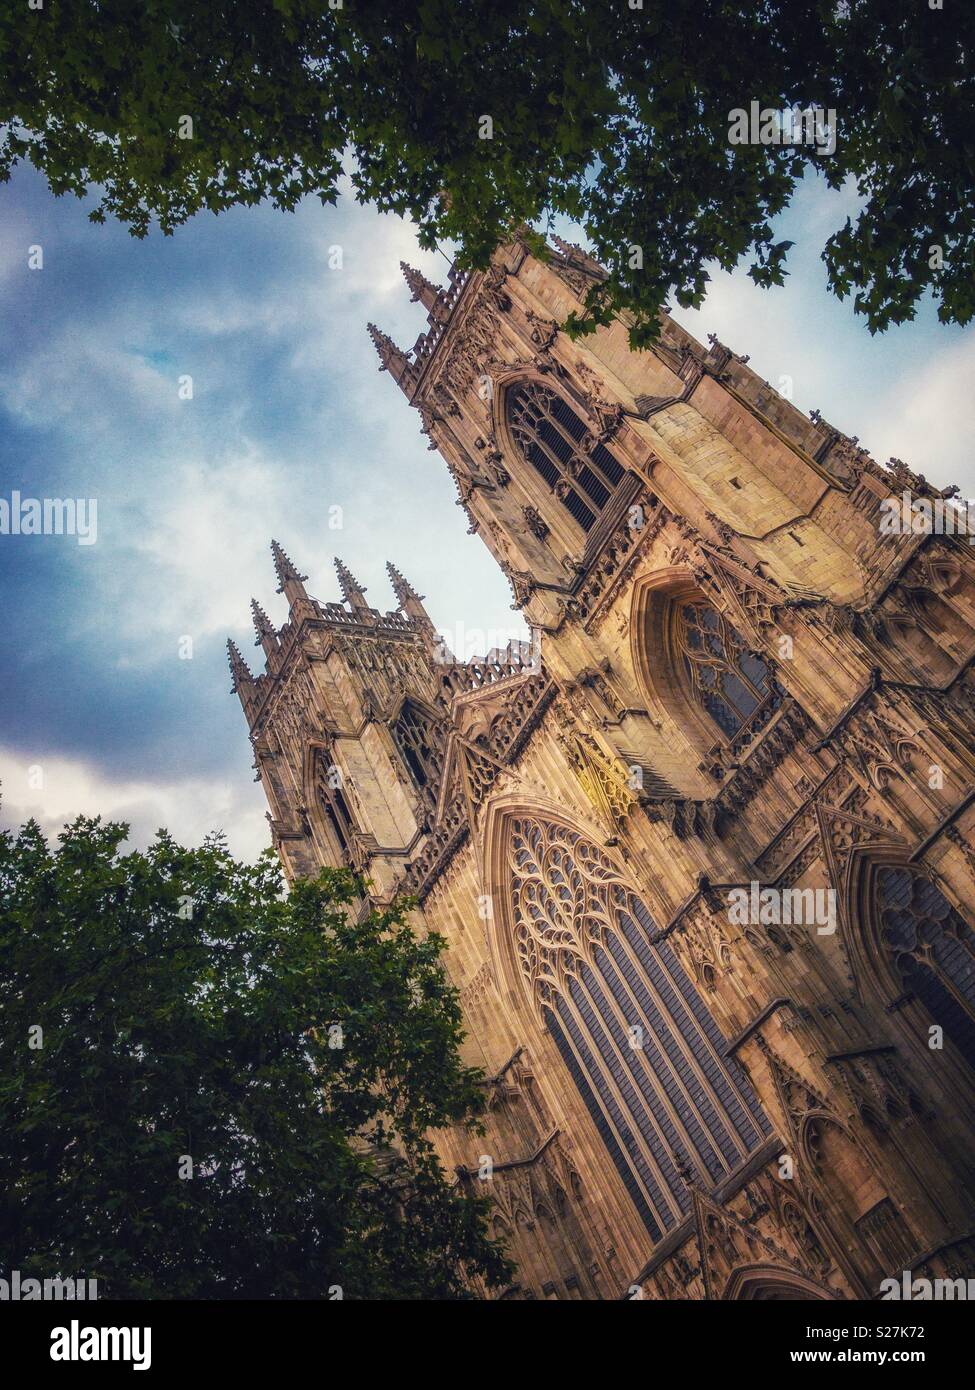 York Minster cathedral Stock Photo